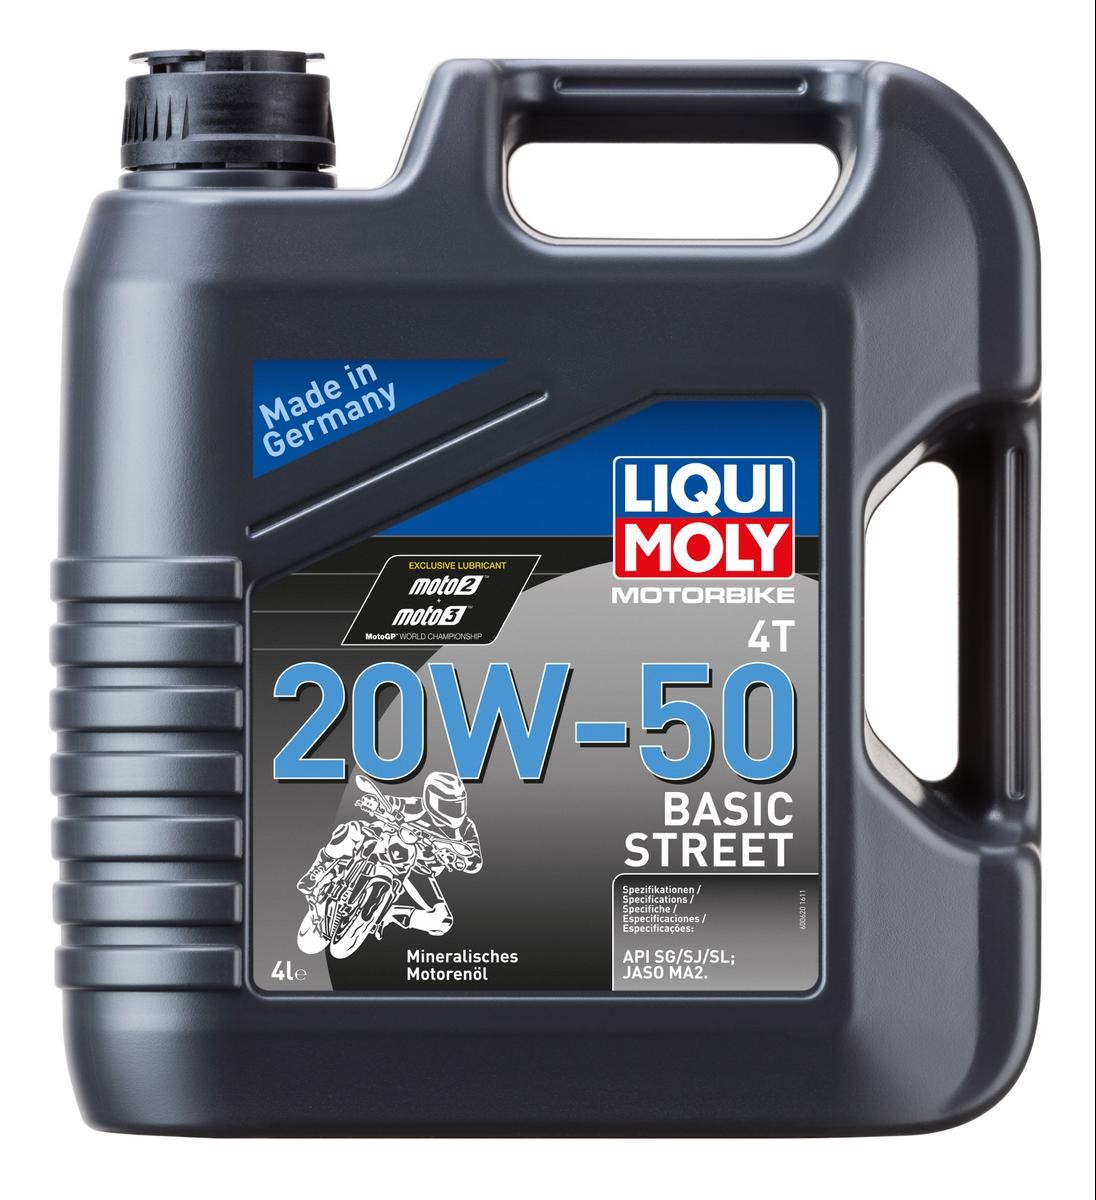 LIQUI MOLY 20729 Engine oil cheap in online store